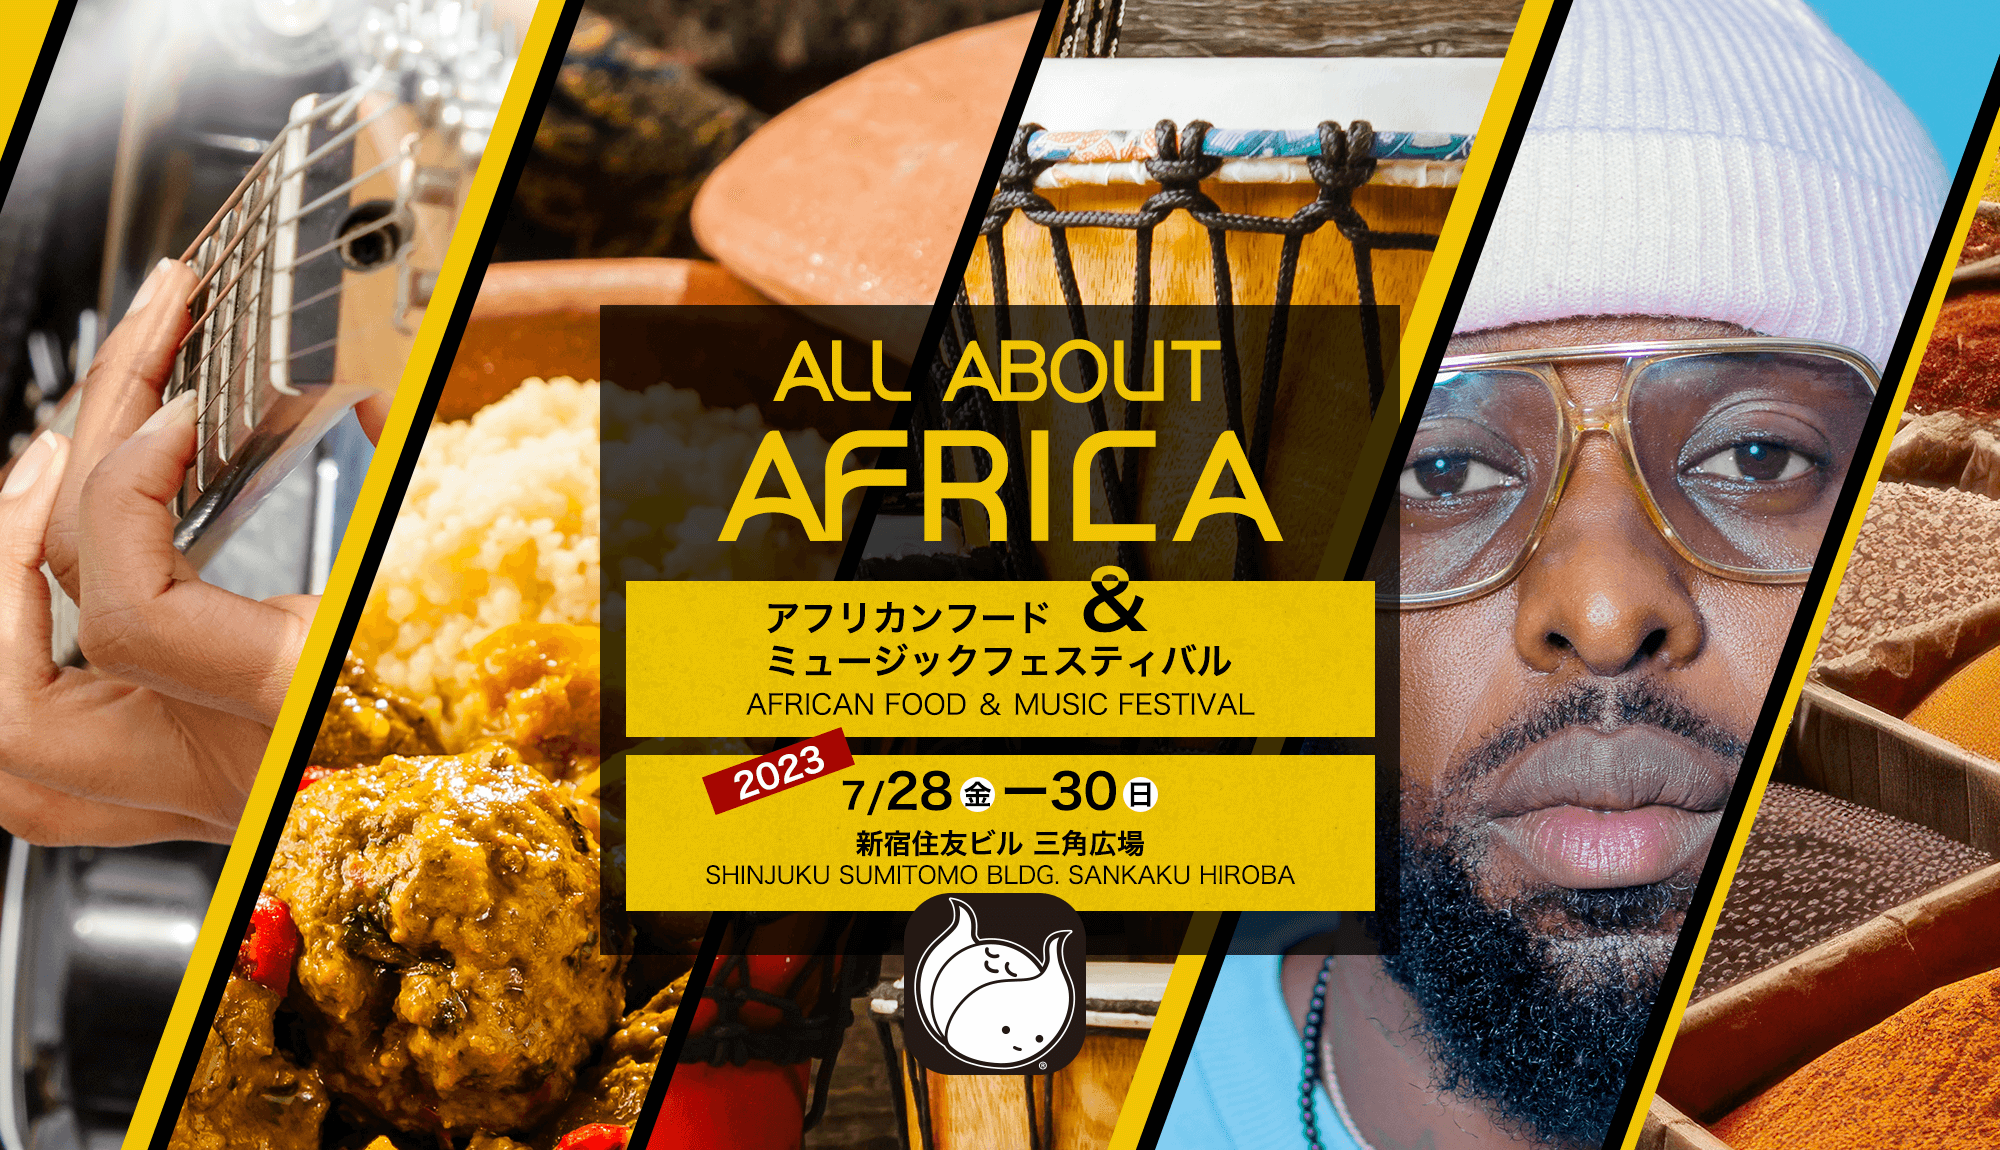 ALL ABOUT AFRICA アフリカンフード＆ミュージックフェスティバル 新宿住友ビル三角広場2023年7/28〜30